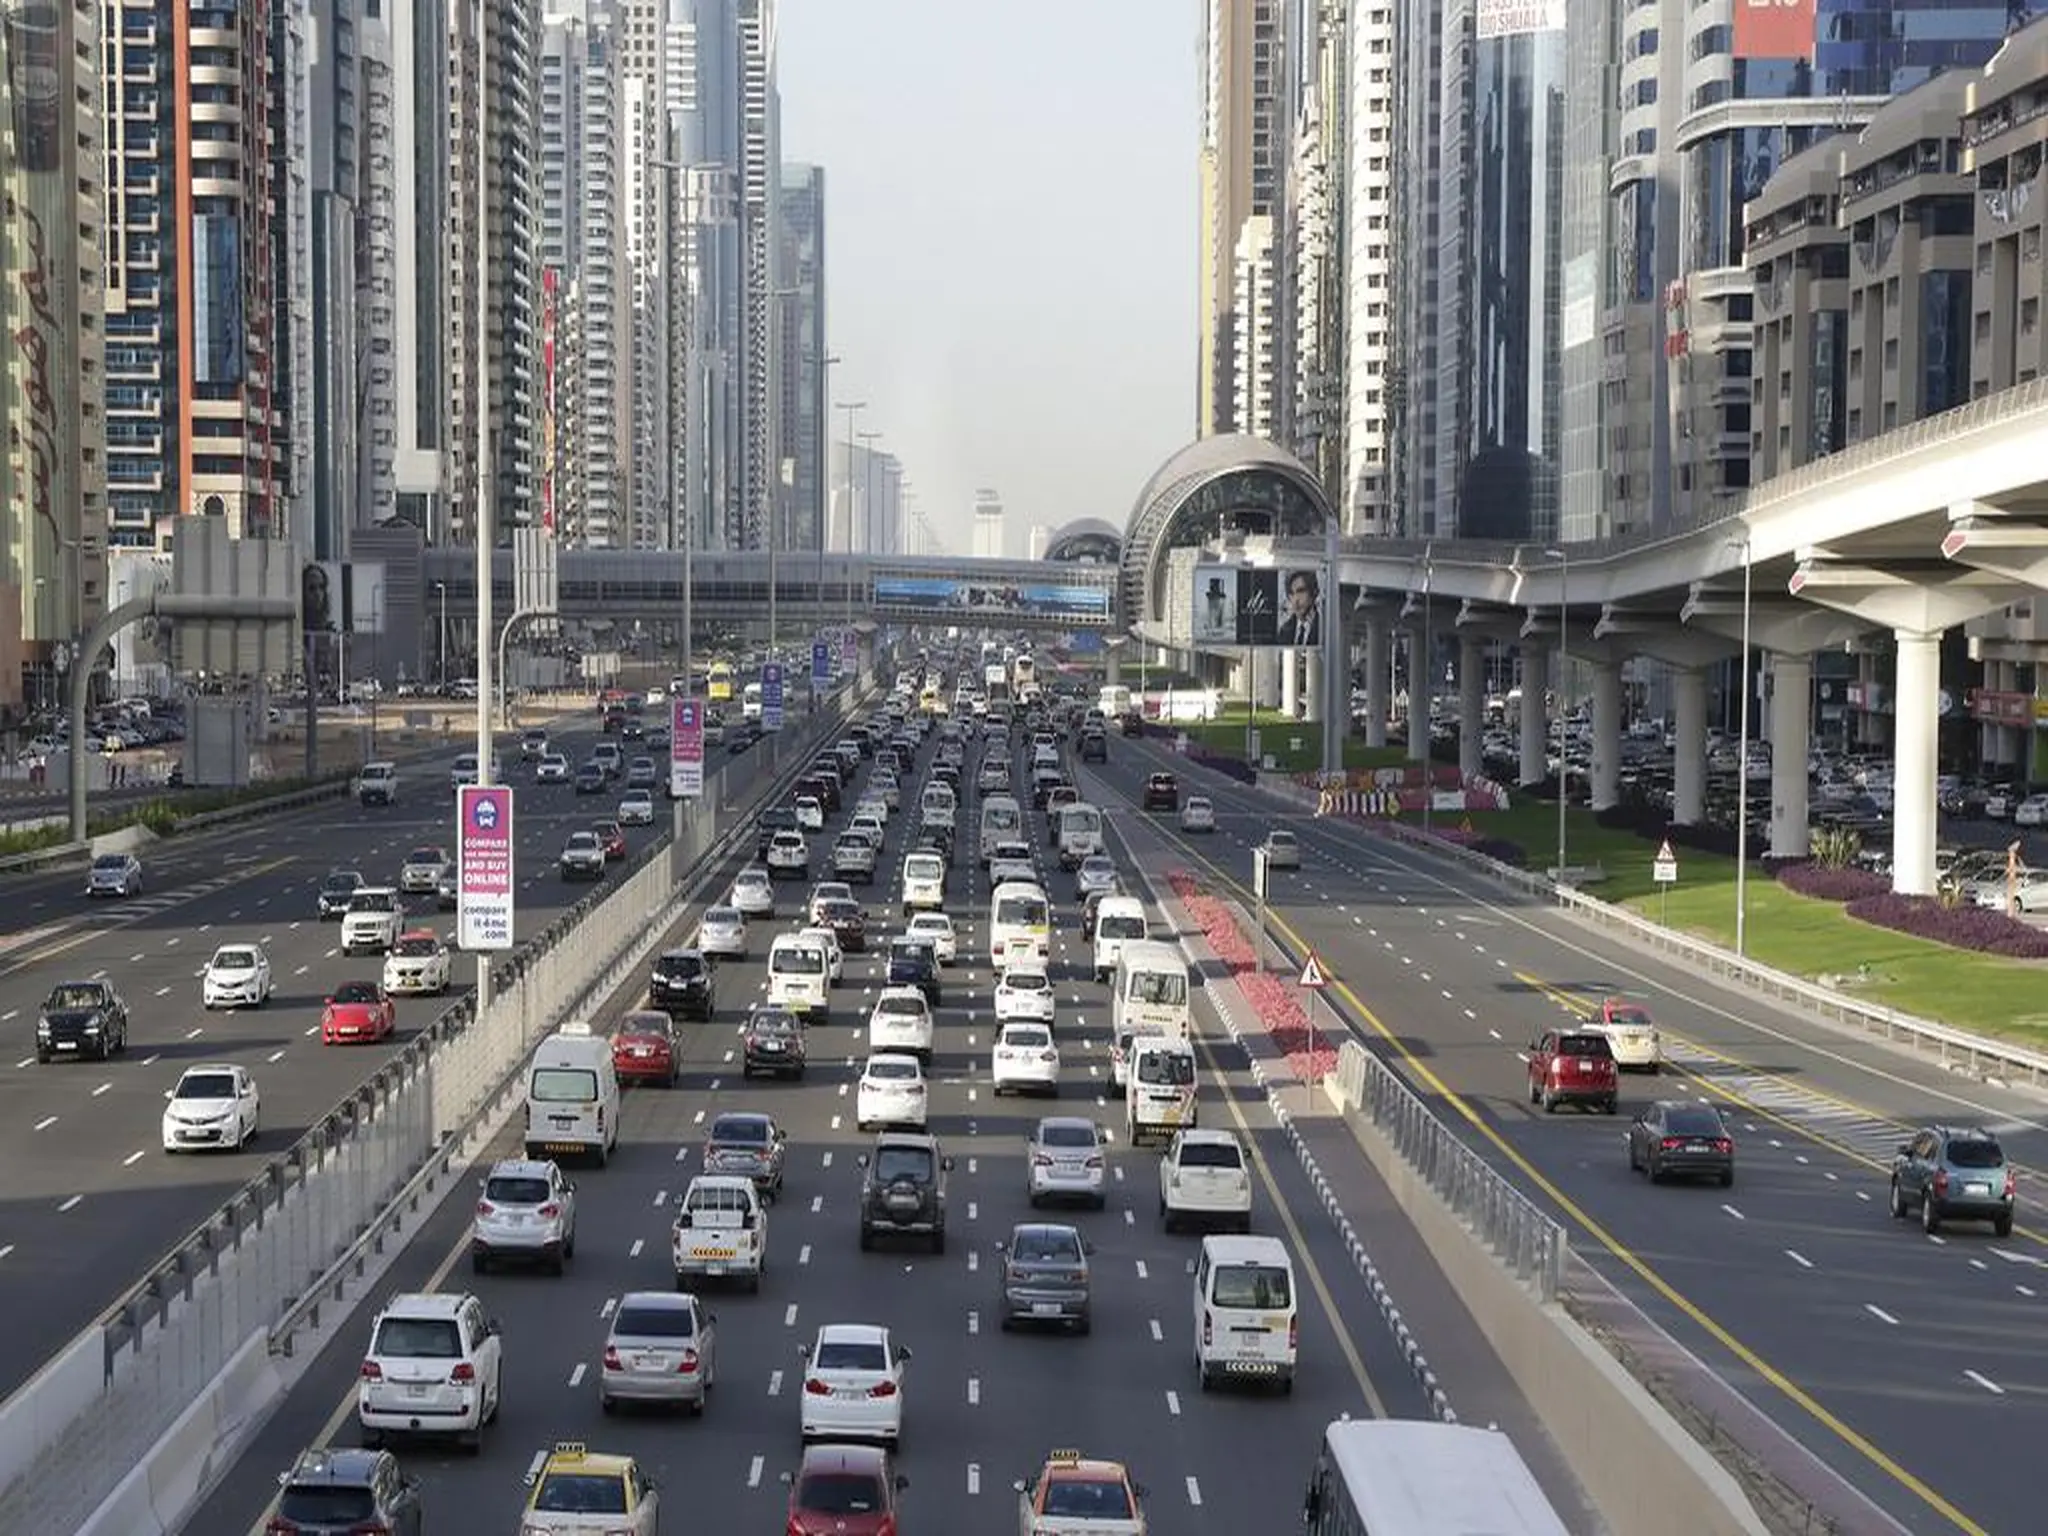 Dubai: How to get a driving license without lessons